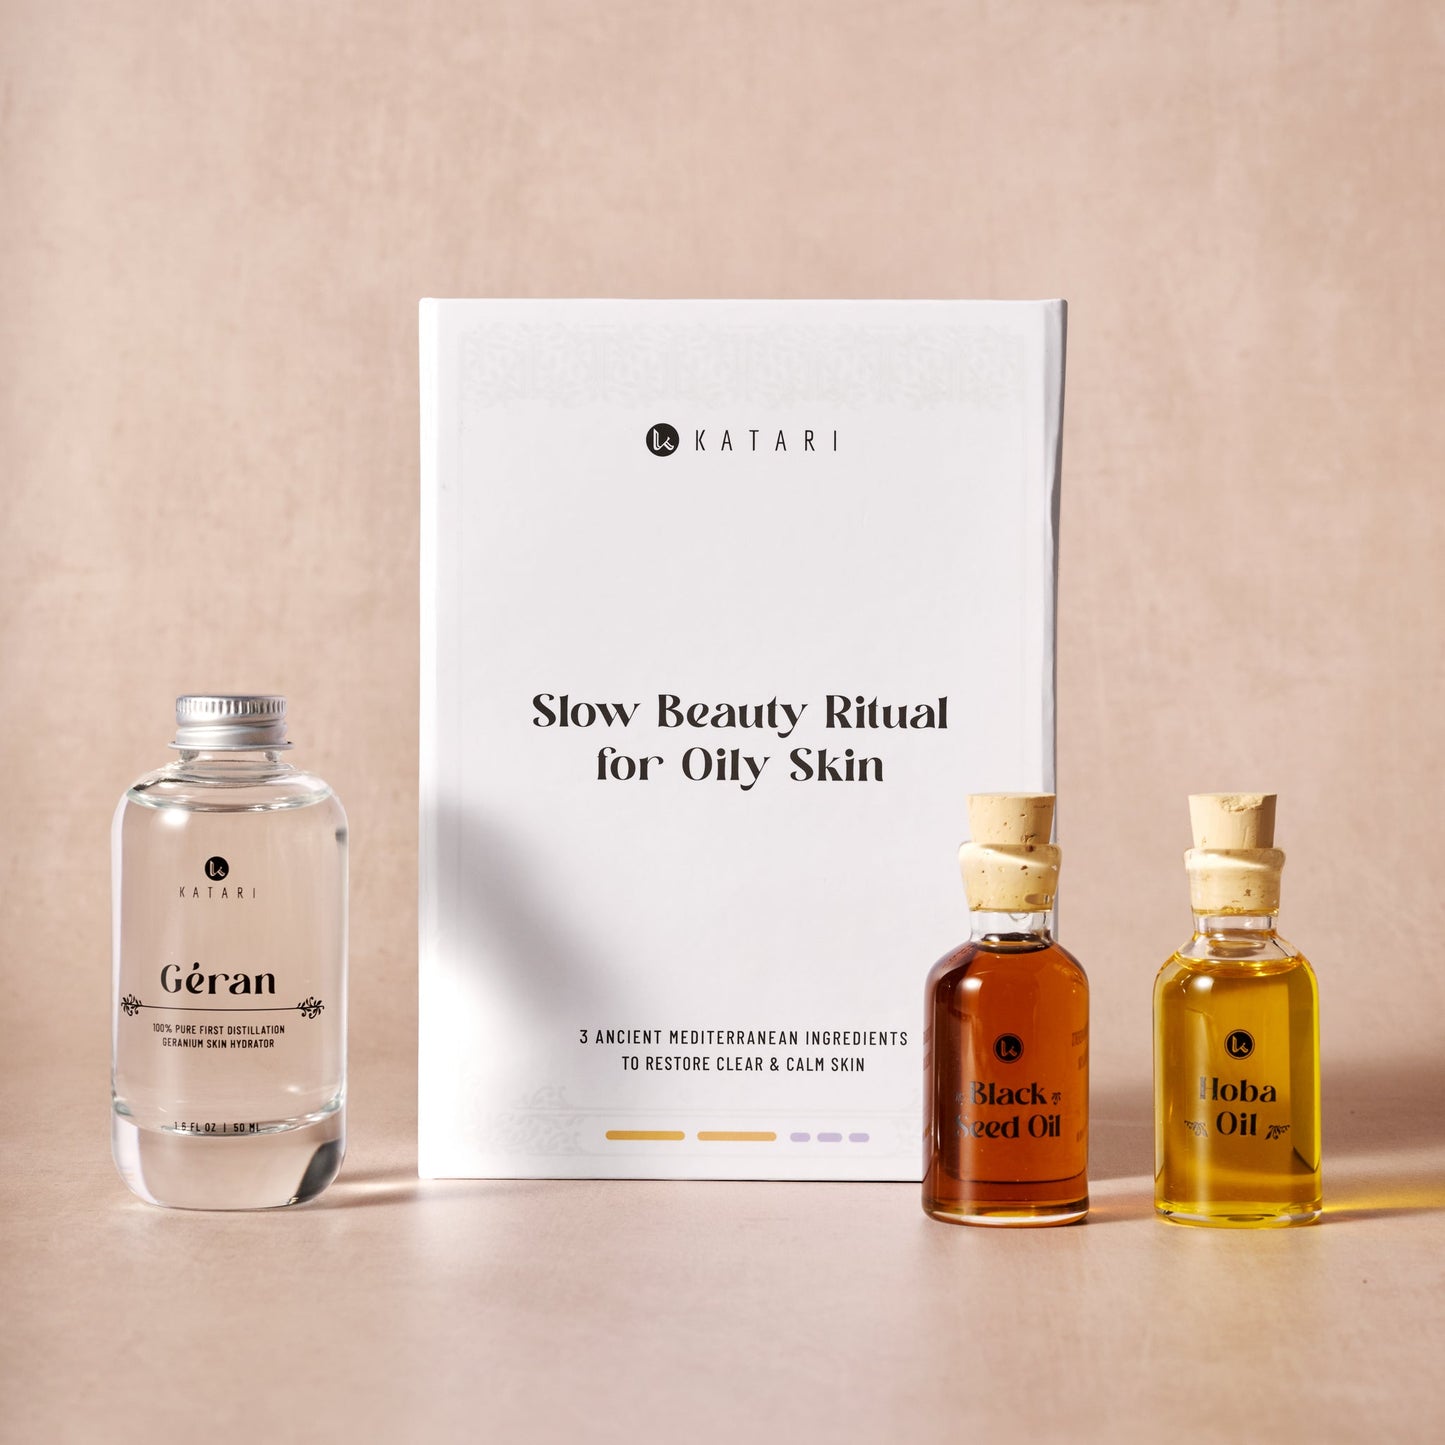 Slow Beauty Ritual for Oily Skin